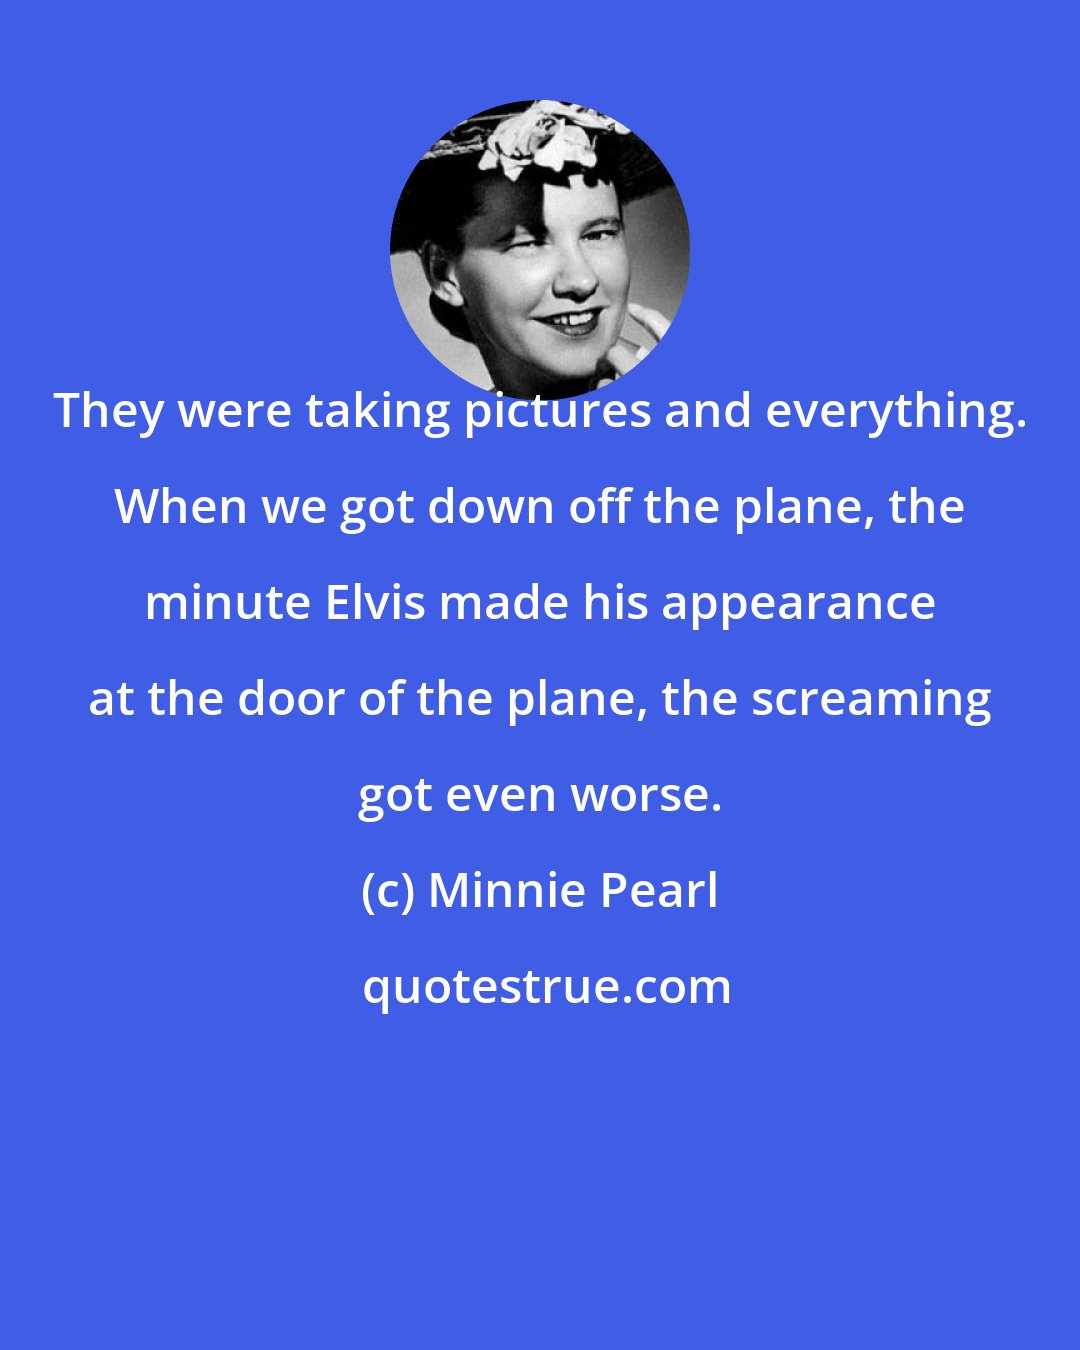 Minnie Pearl: They were taking pictures and everything. When we got down off the plane, the minute Elvis made his appearance at the door of the plane, the screaming got even worse.